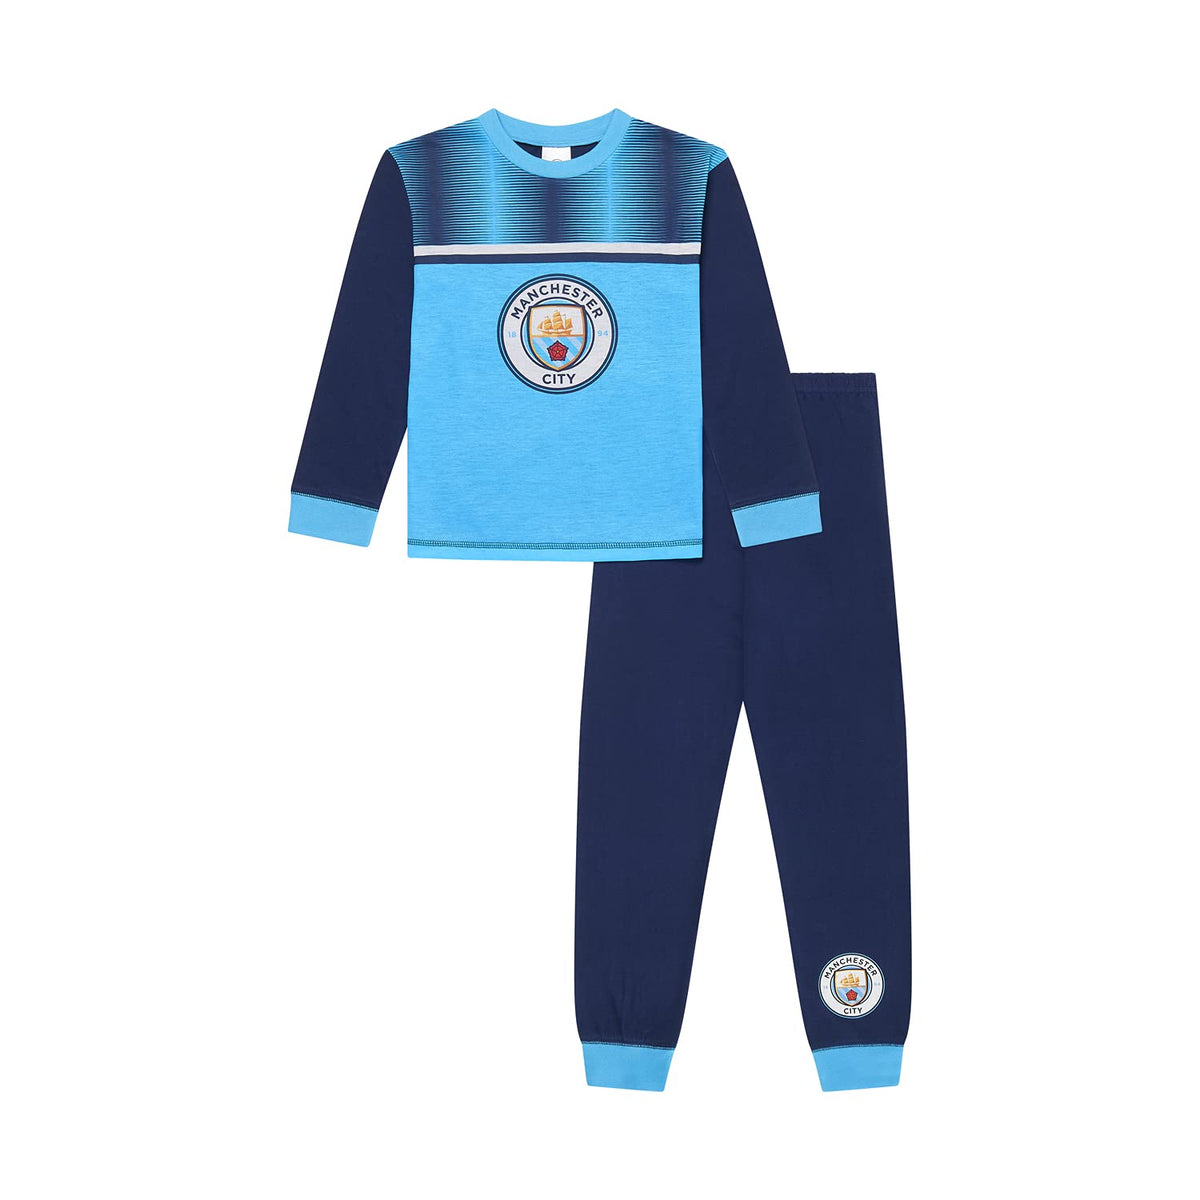 Manchester City F.C. Boys Pyjamas, Man City PJ Set Ages 3 to 15 Years Old, Official Football Merchandise (4-5 Years) Blue